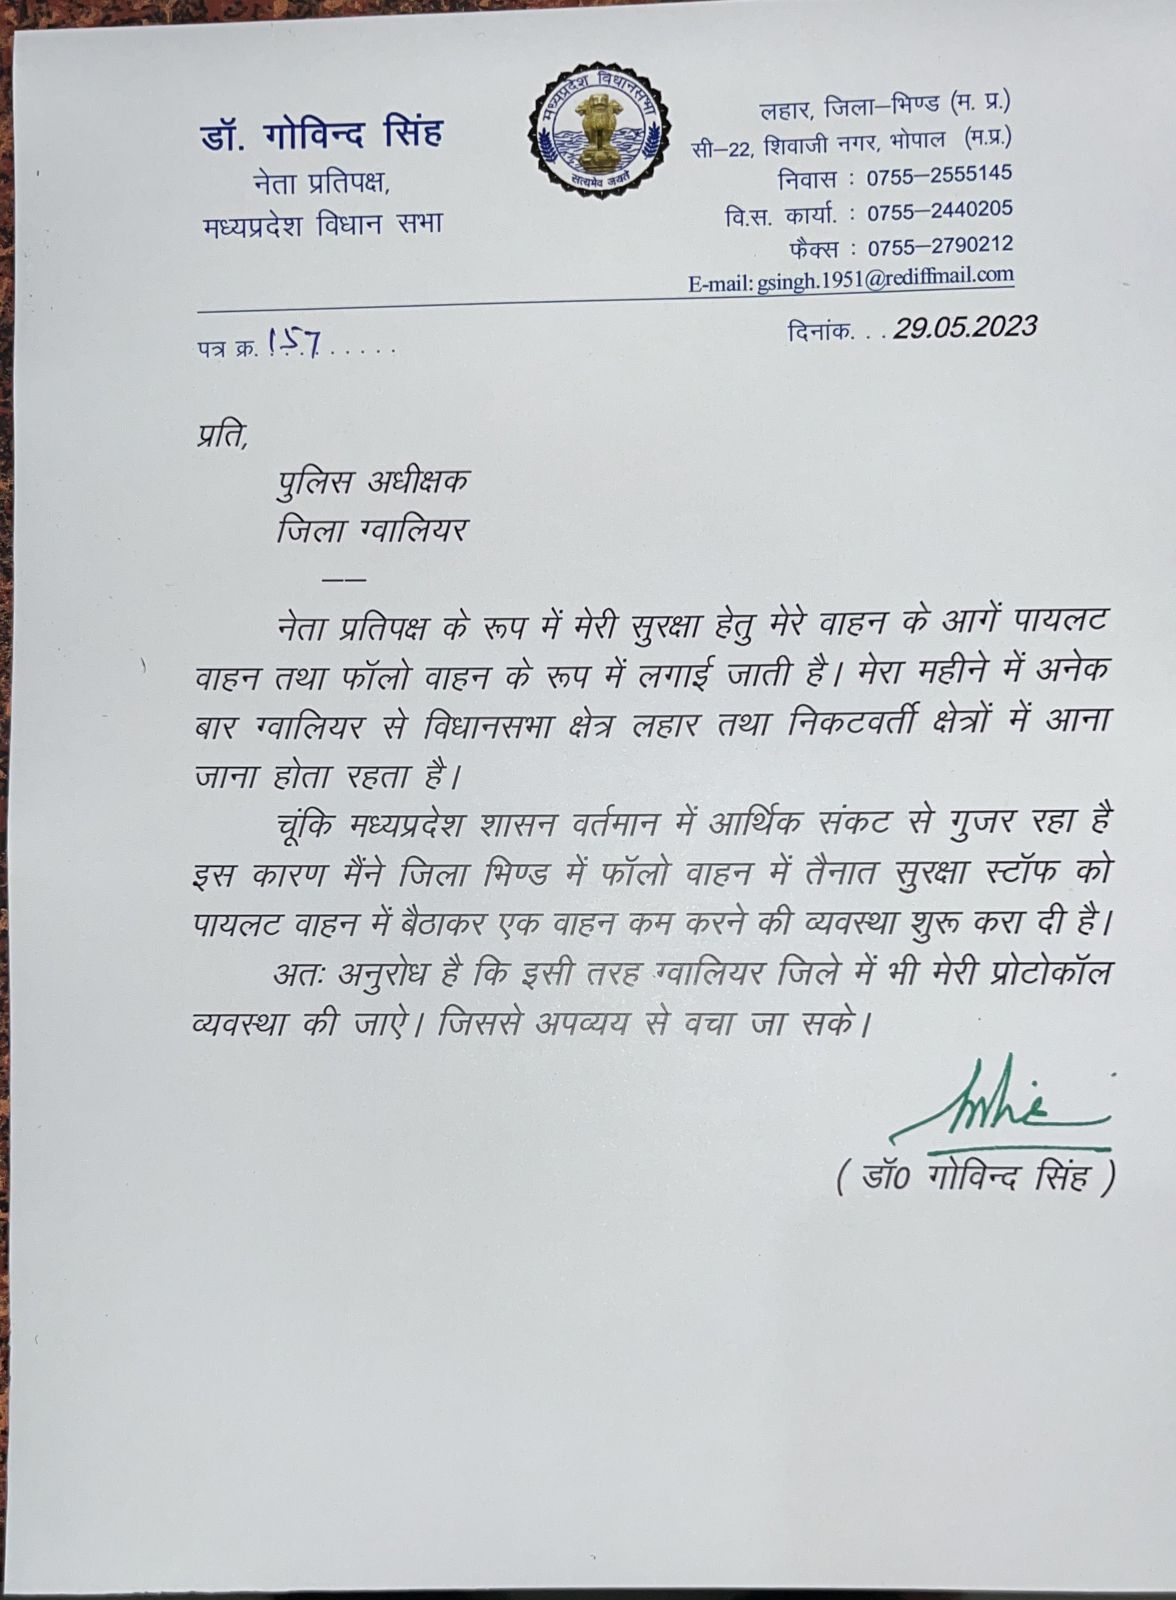 Govind Singh wrote letter to Gwalior SP